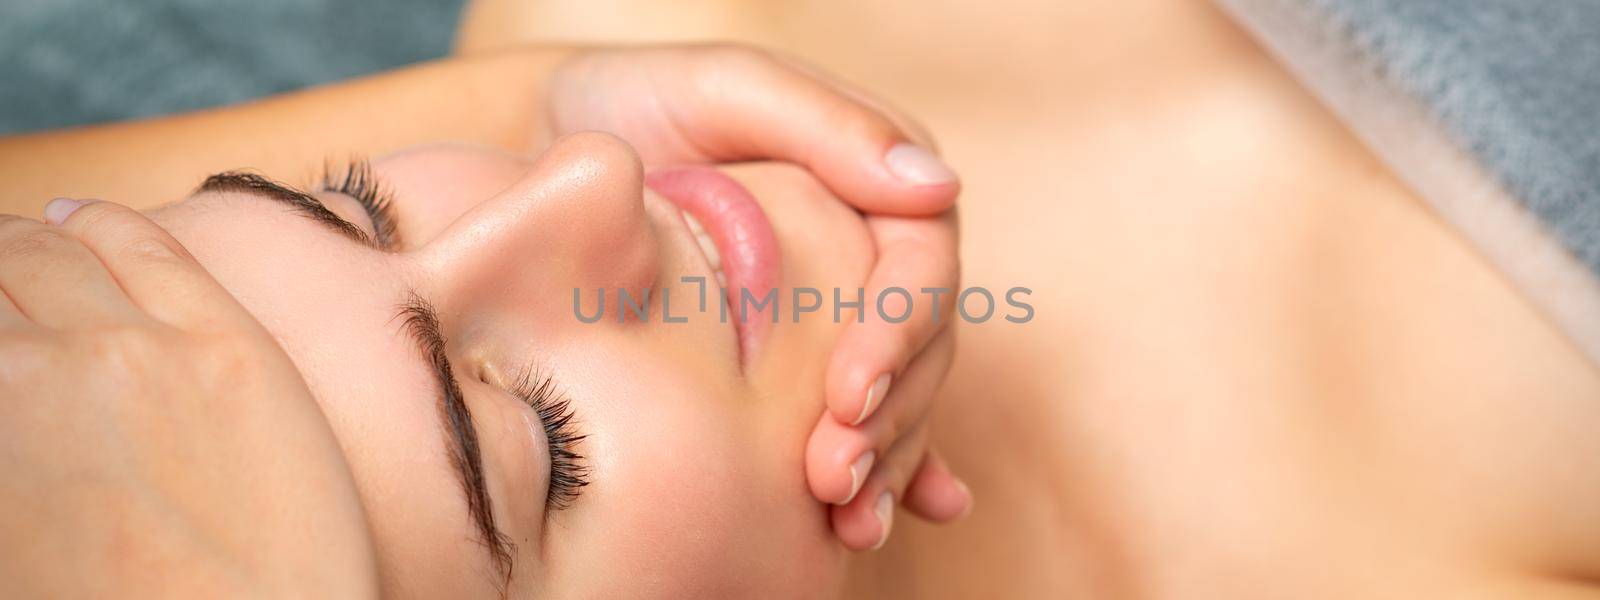 Face massage of detox therapy for the pretty female patient at spa salon